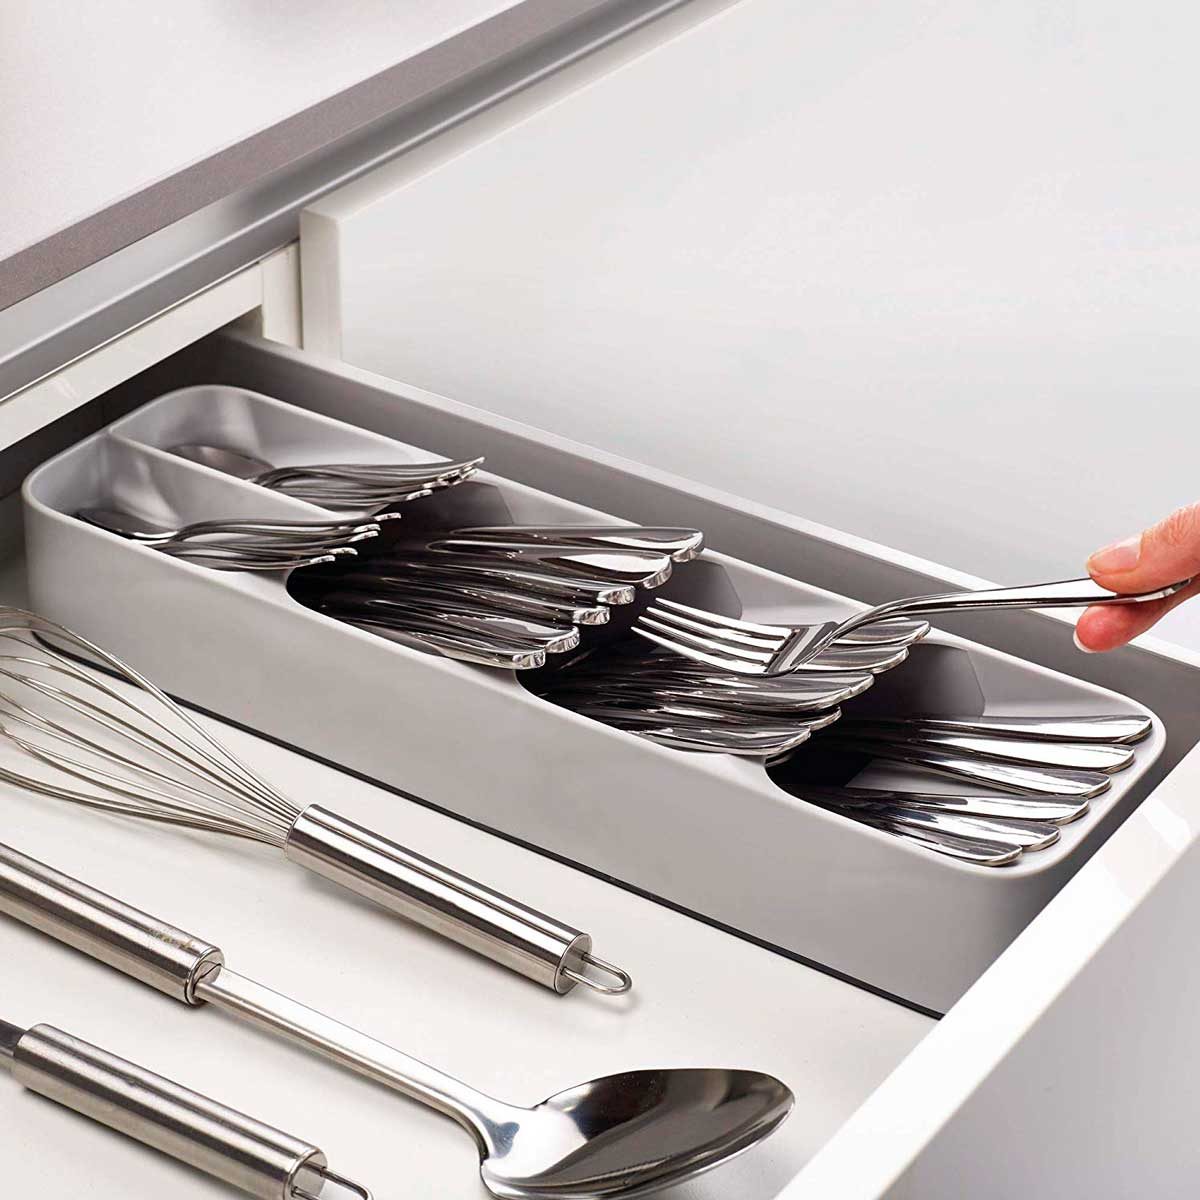 10 Kitchen Drawer Organizers You Need To Have